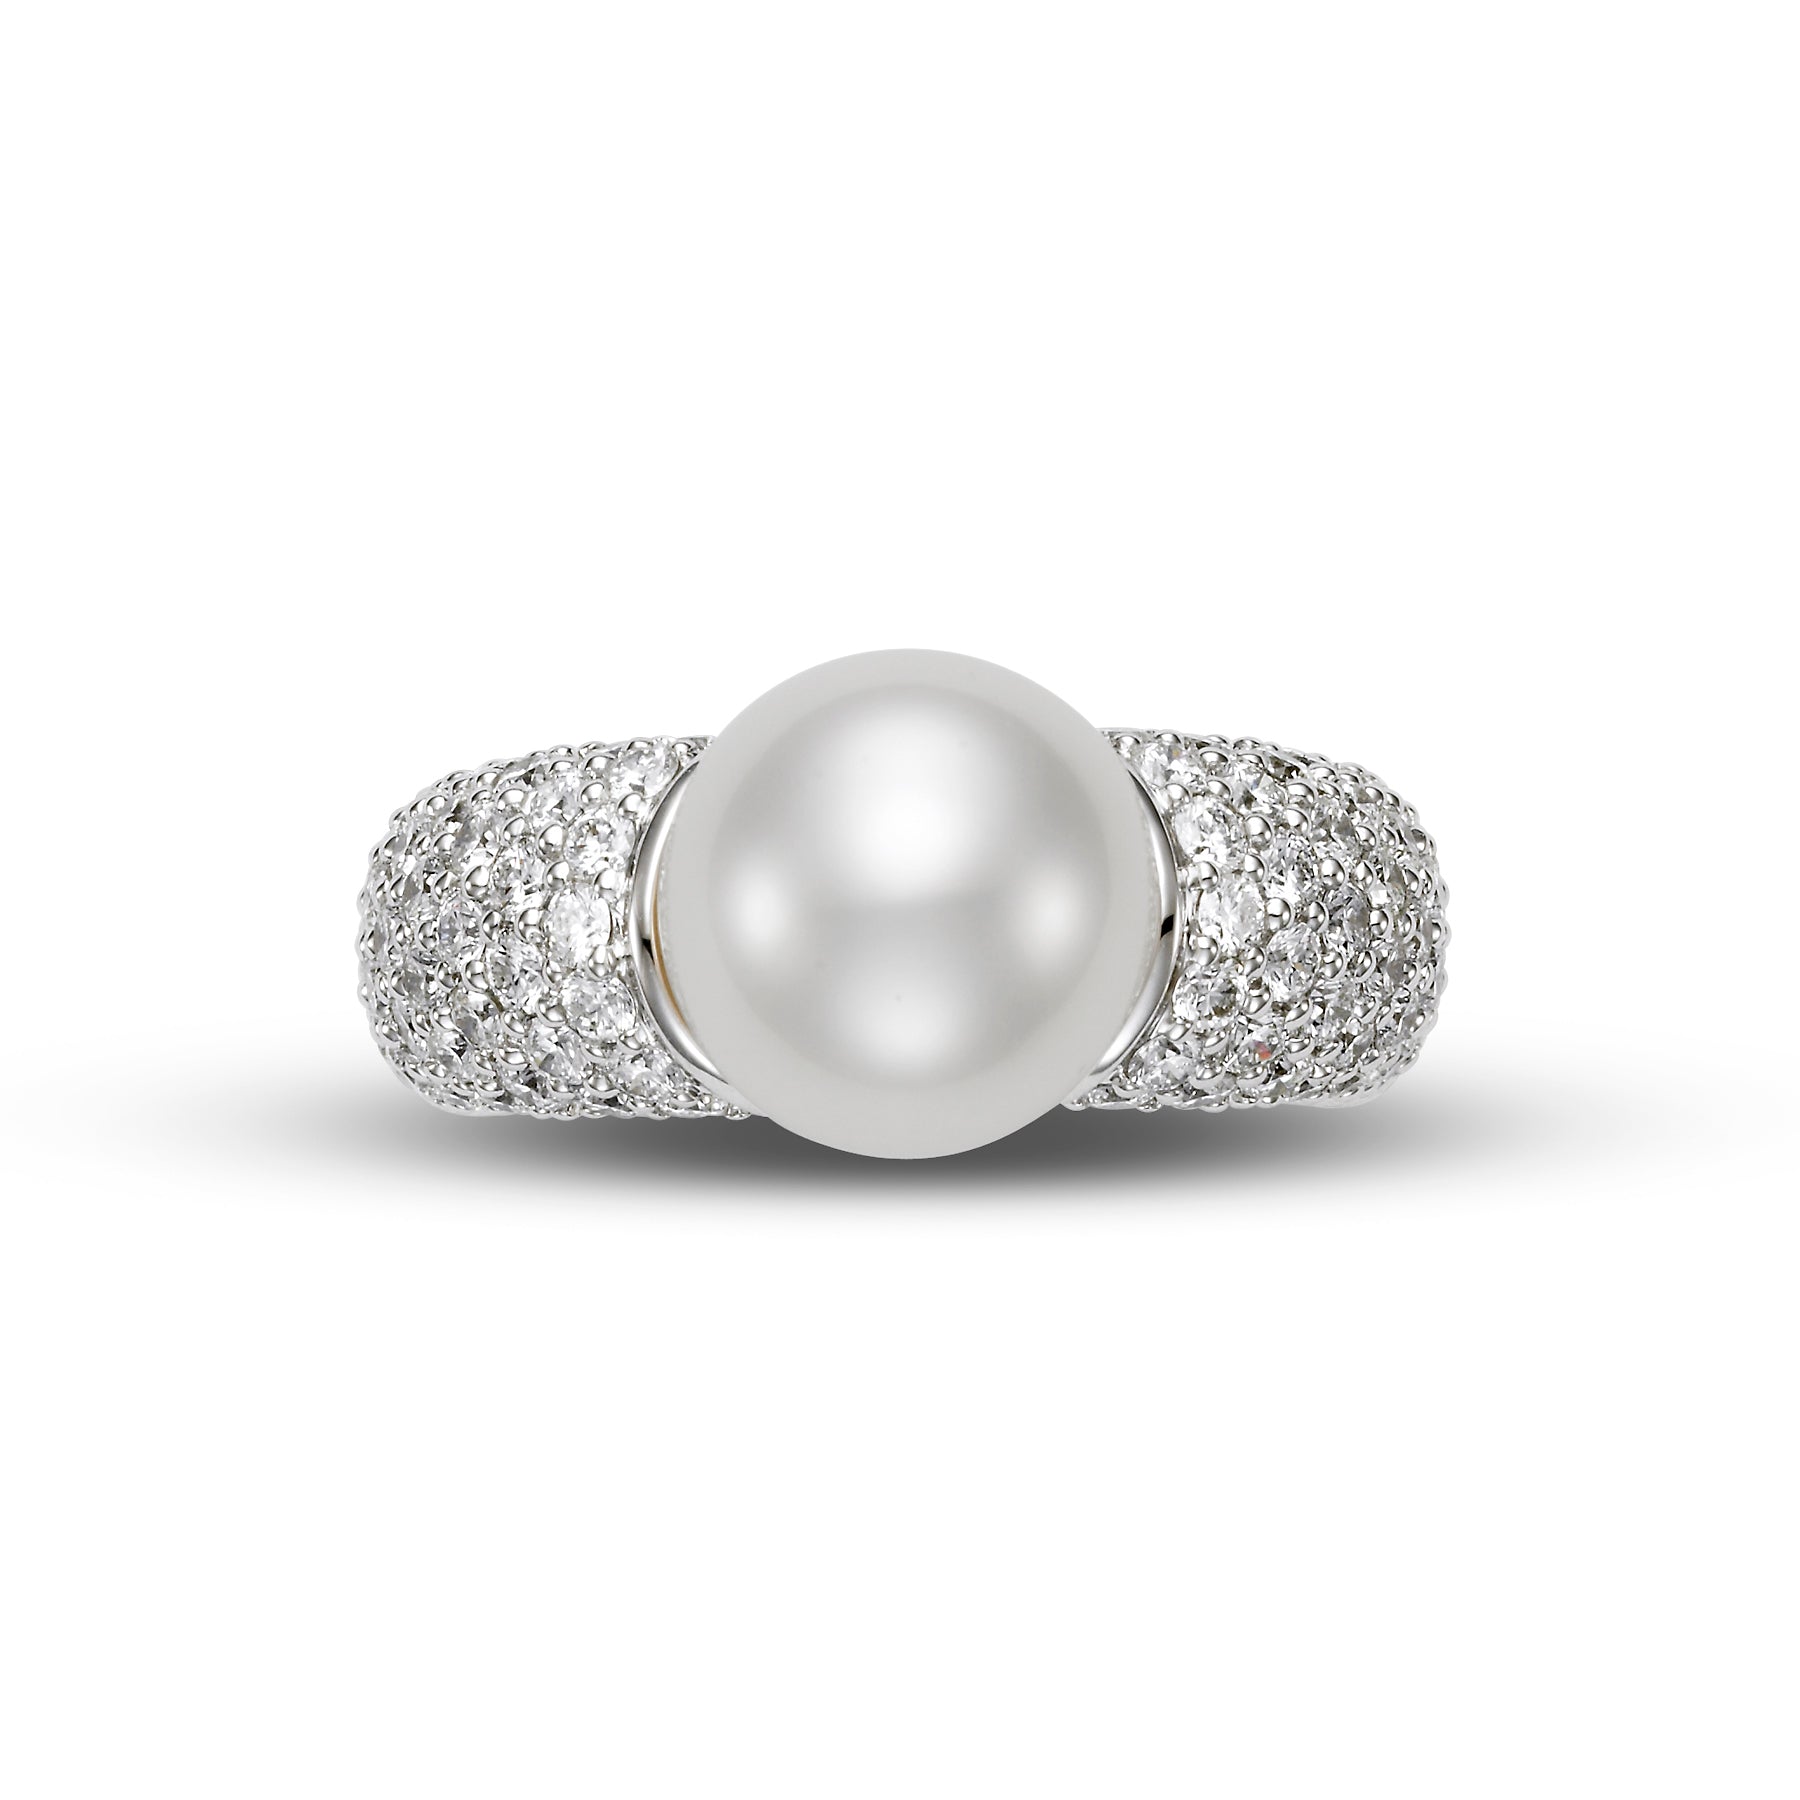 WHITE SOUTH SEA PEARL RING WITH DIAMOND PAVE